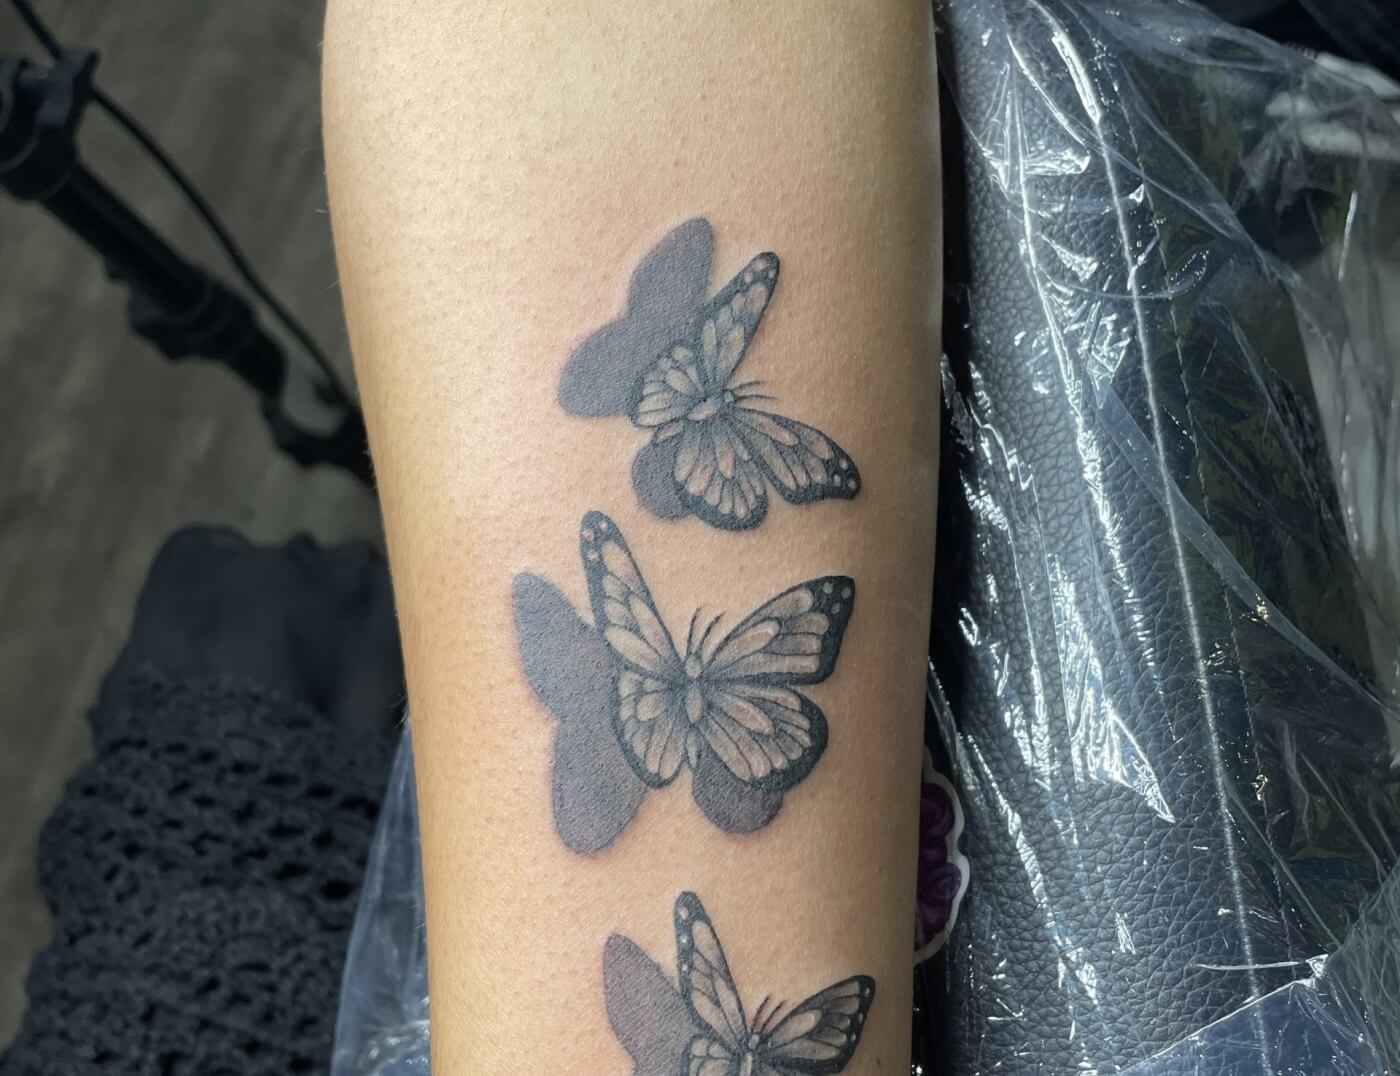 Butterfly tattoo by Paper Airplane Jane of Iron Palm Tattoos. Walk-Ins are accepted. Call 404-973-7828 or stop by for a free consultation.